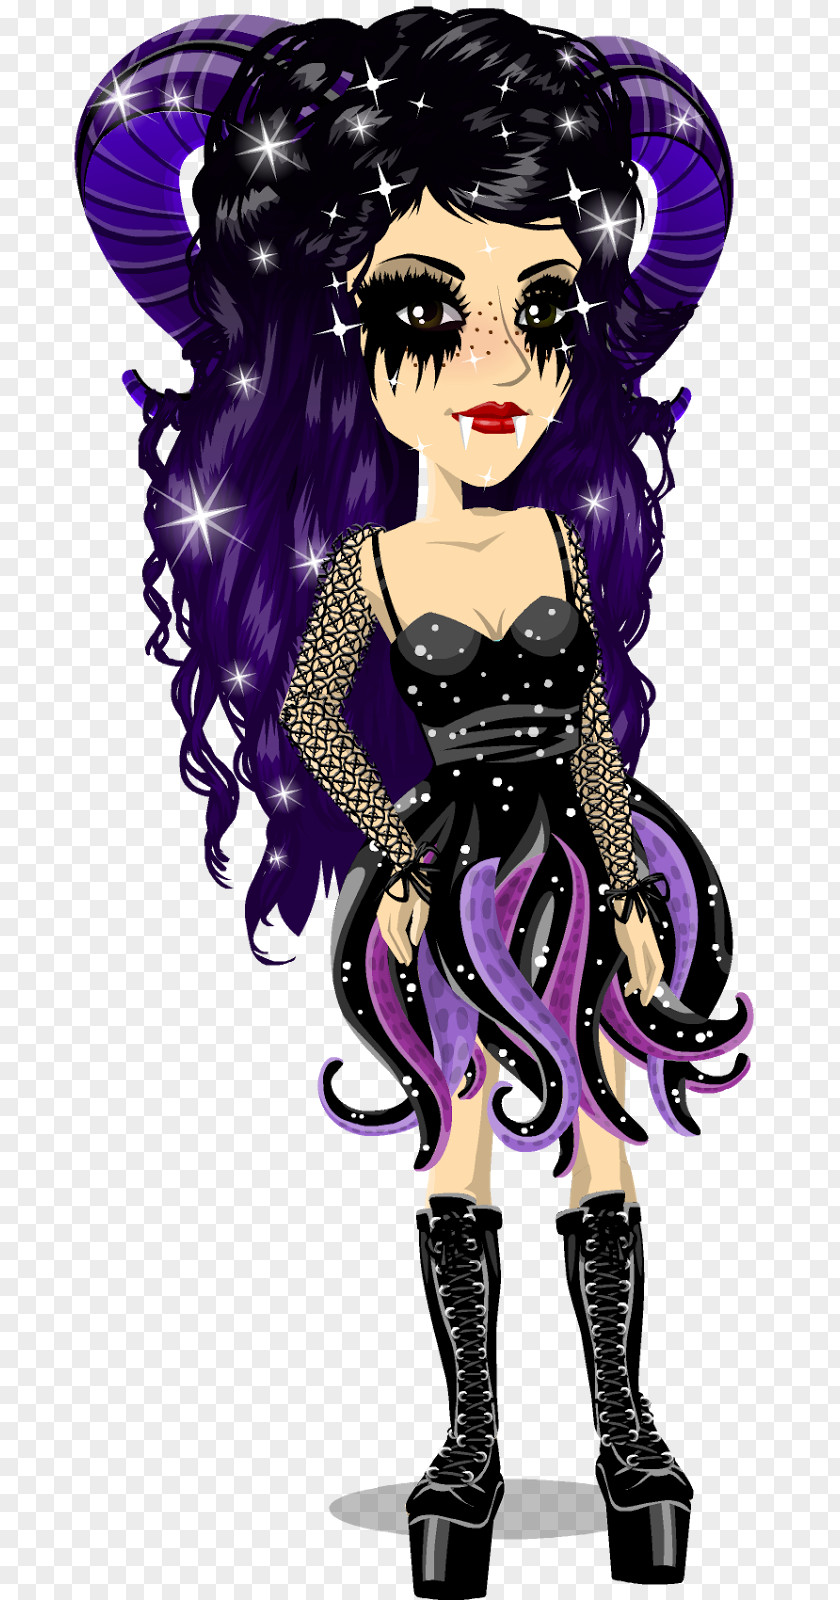 Happy 8 March Day Black Hair Cartoon Doll PNG